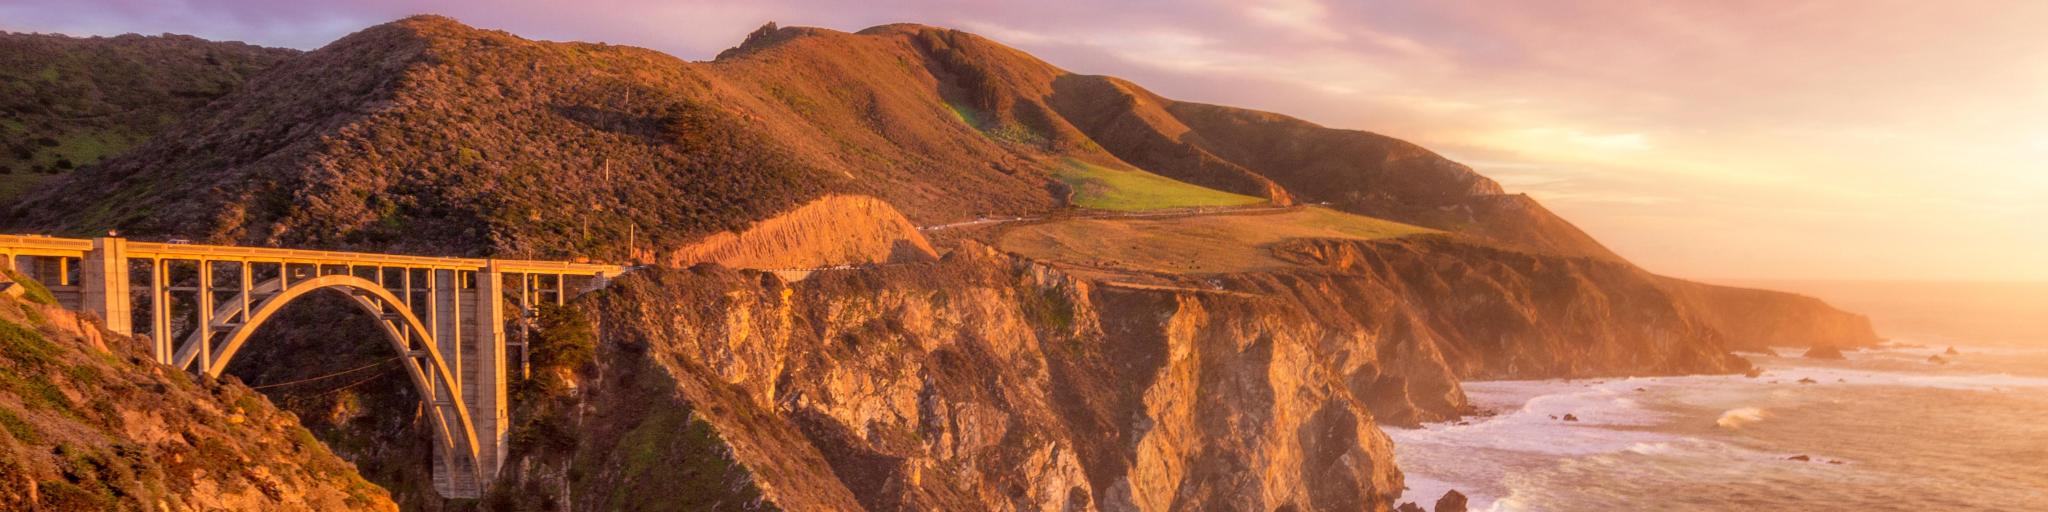 Bixby Creek Bridge in Monterey County, California taken at sunset with dramatic cliffs and sea.